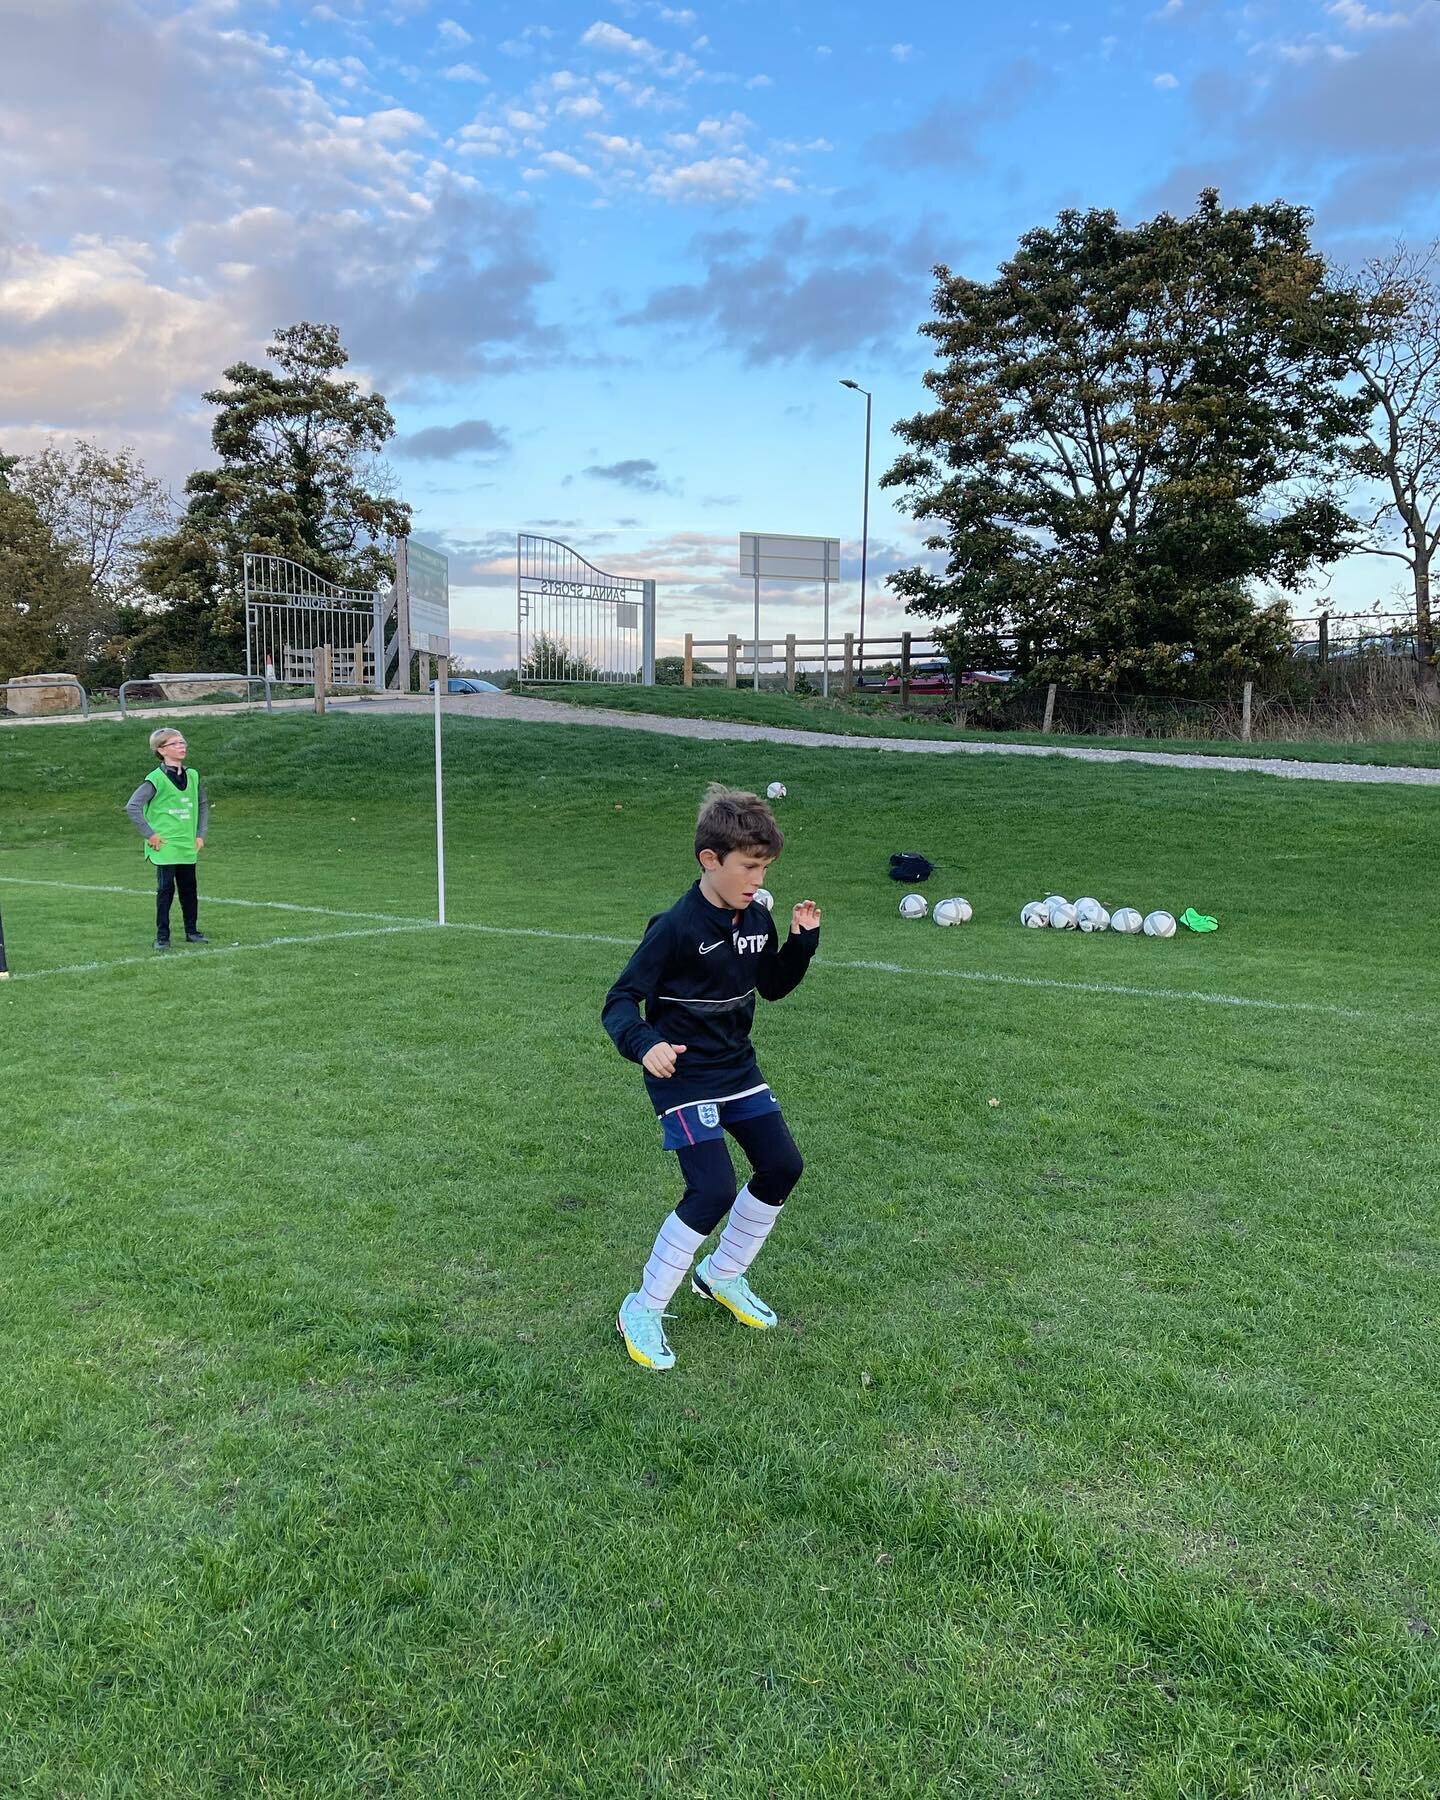 Fast feet and body position were the big drills last night with the U11&rsquo;s. Well done to everyone. #playthebeautifulgamefc